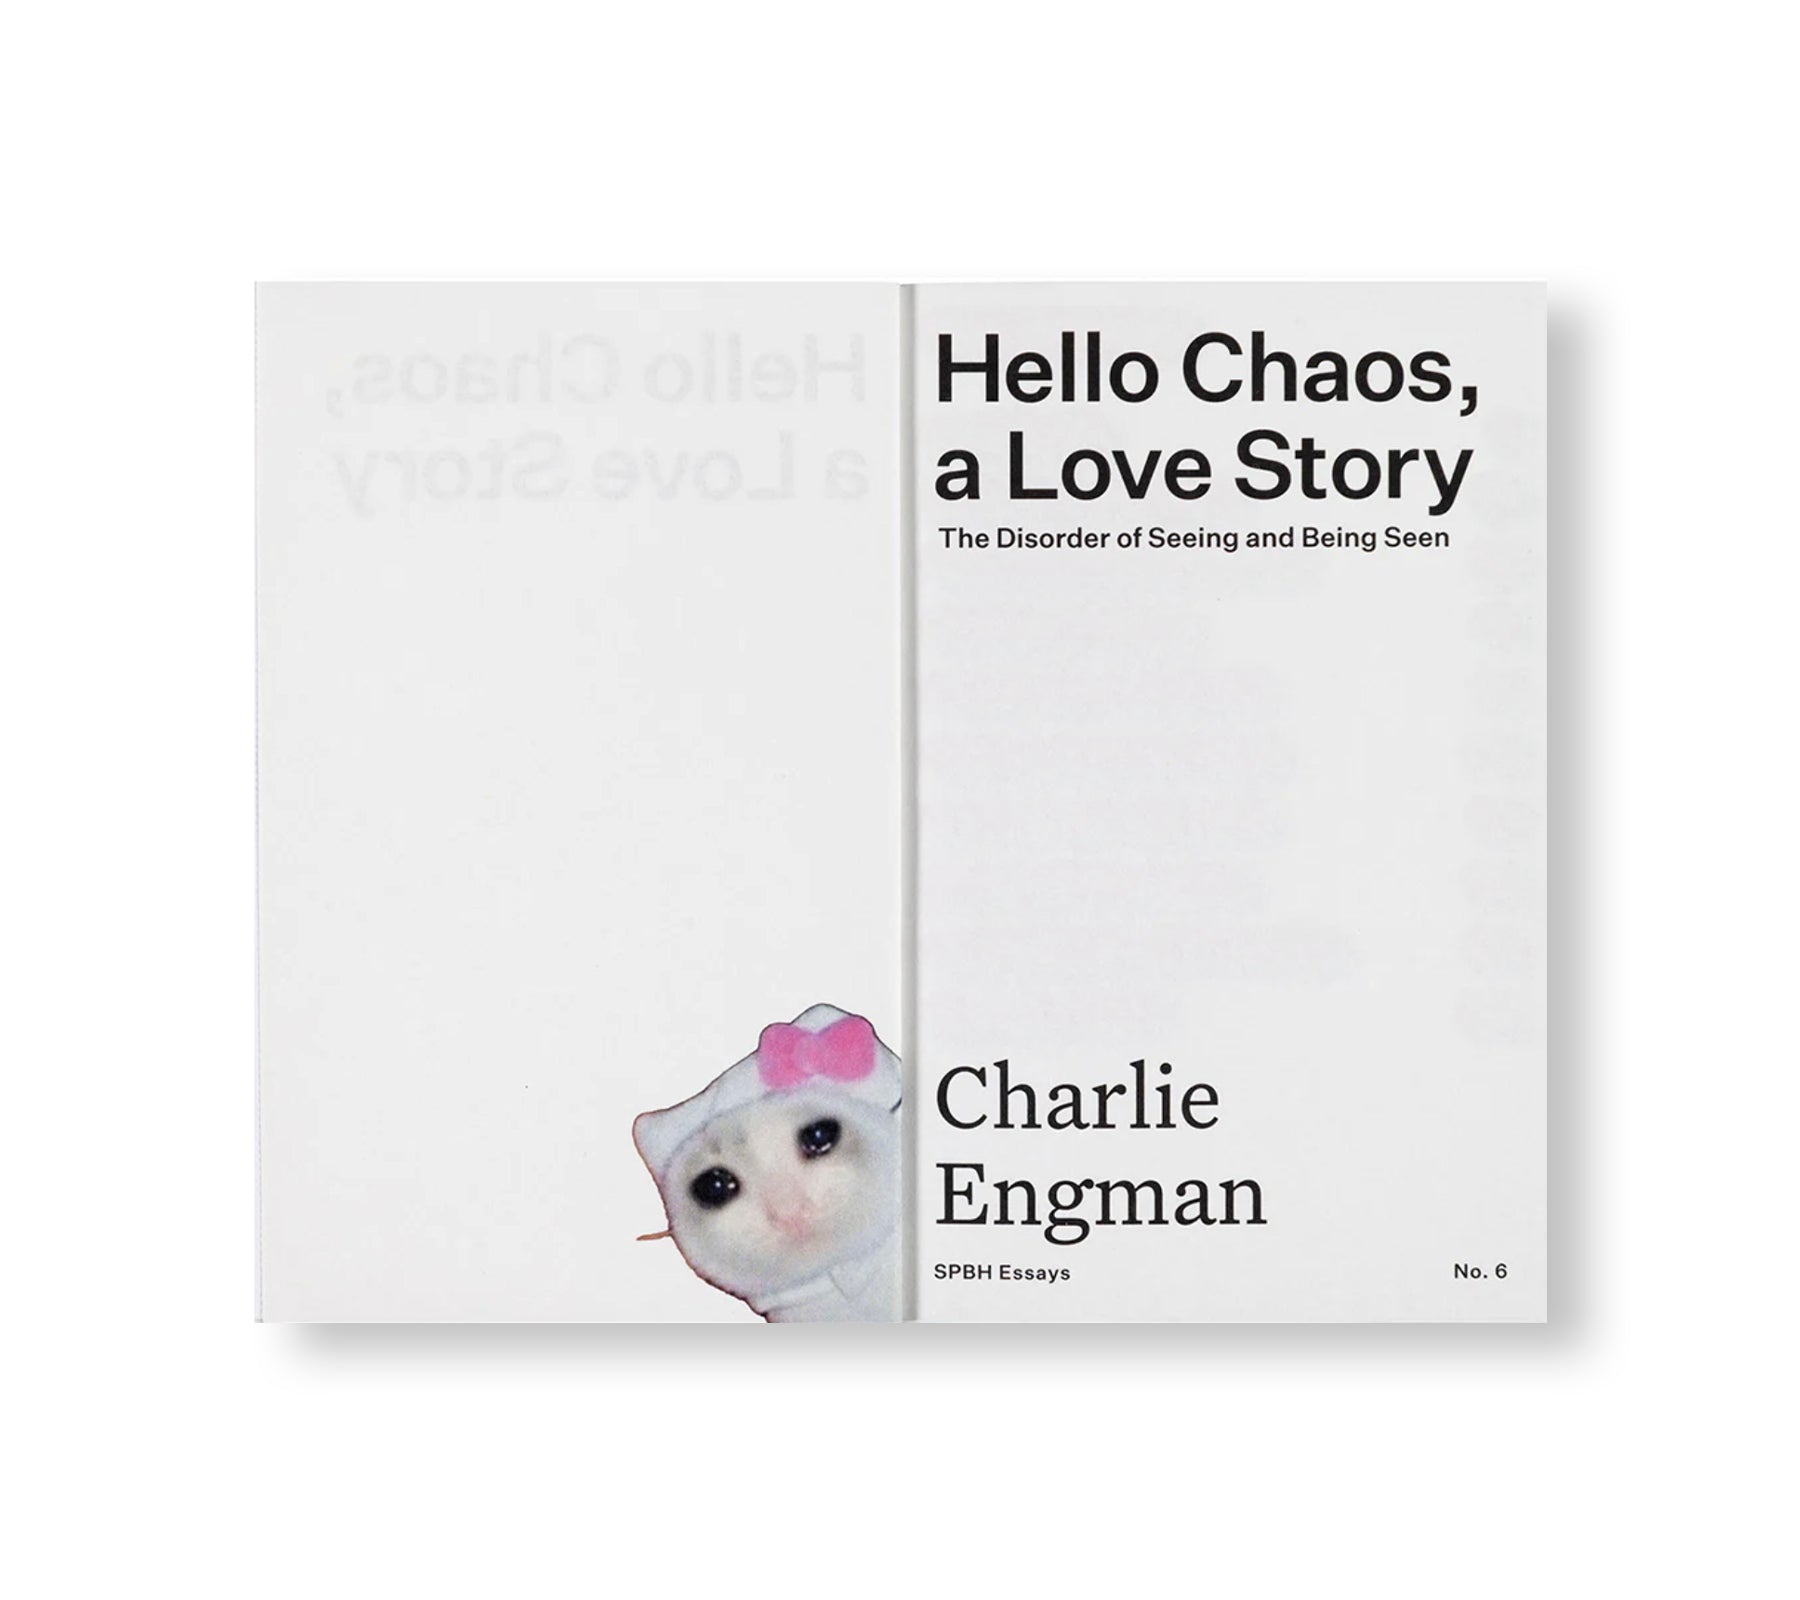 HELLO CHAOS, A LOVE STORY: THE DISORDER OF SEEING AND BEING SEEN by Charlie Engman [SIGNED]